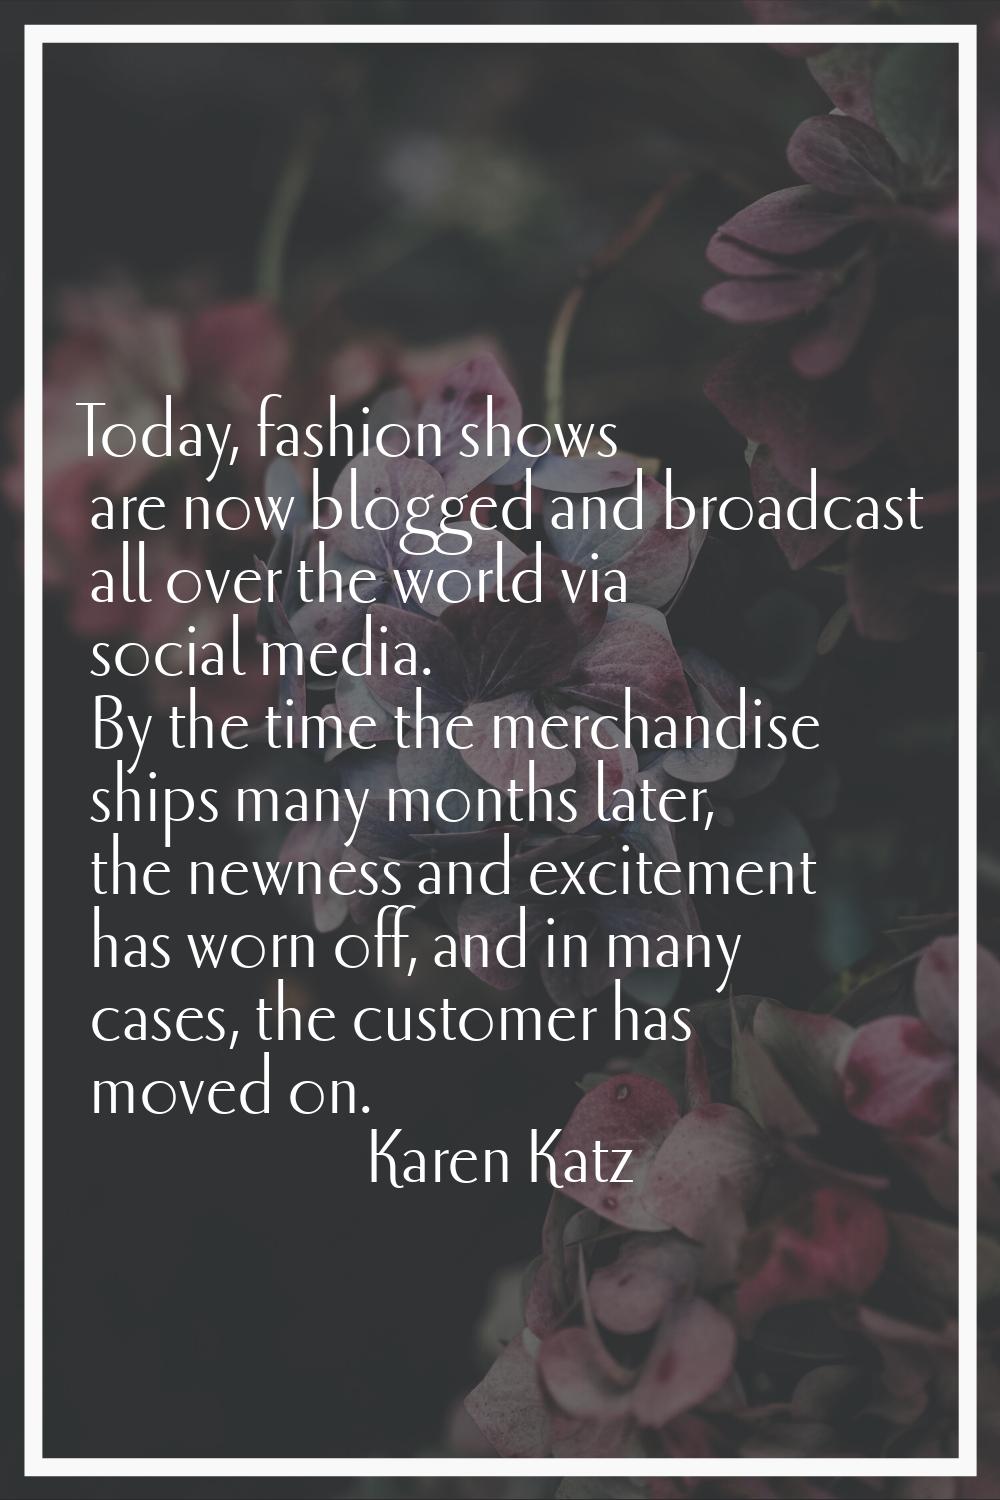 Today, fashion shows are now blogged and broadcast all over the world via social media. By the time